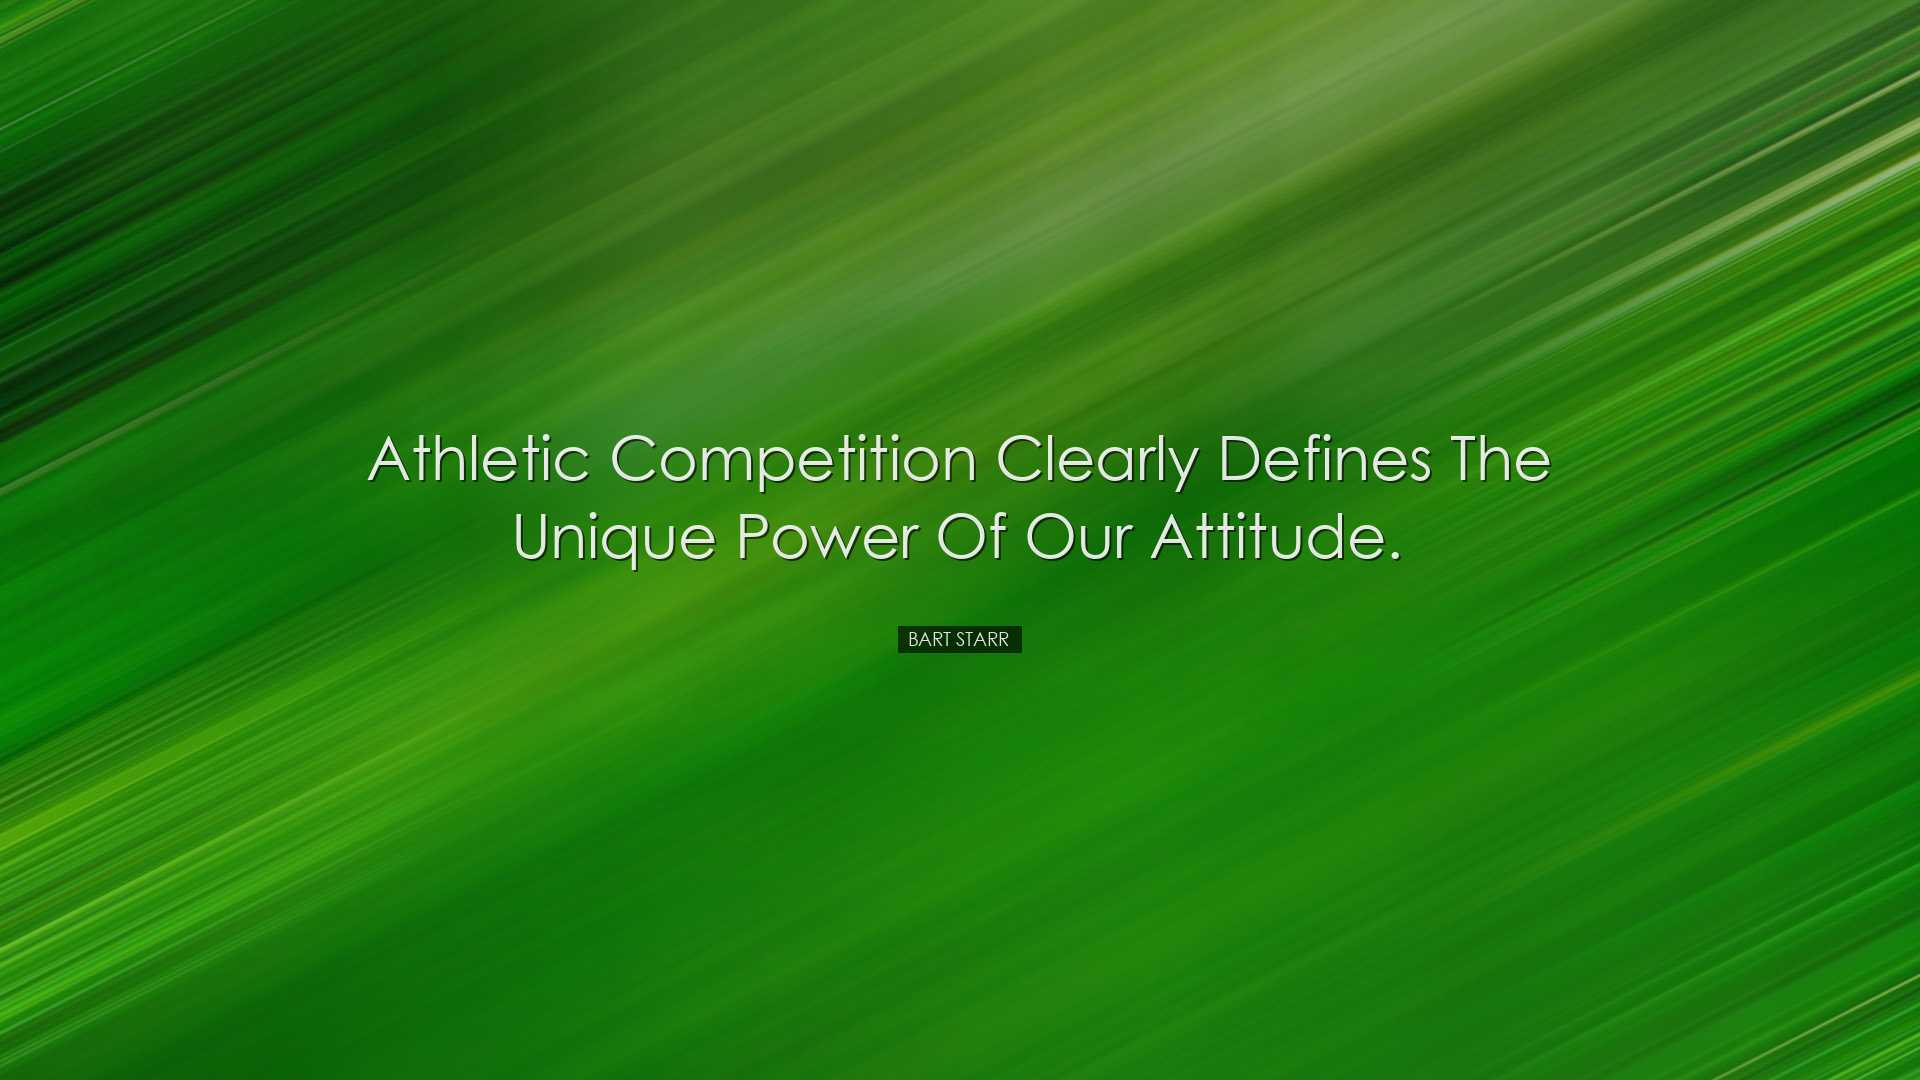 Athletic competition clearly defines the unique power of our attit